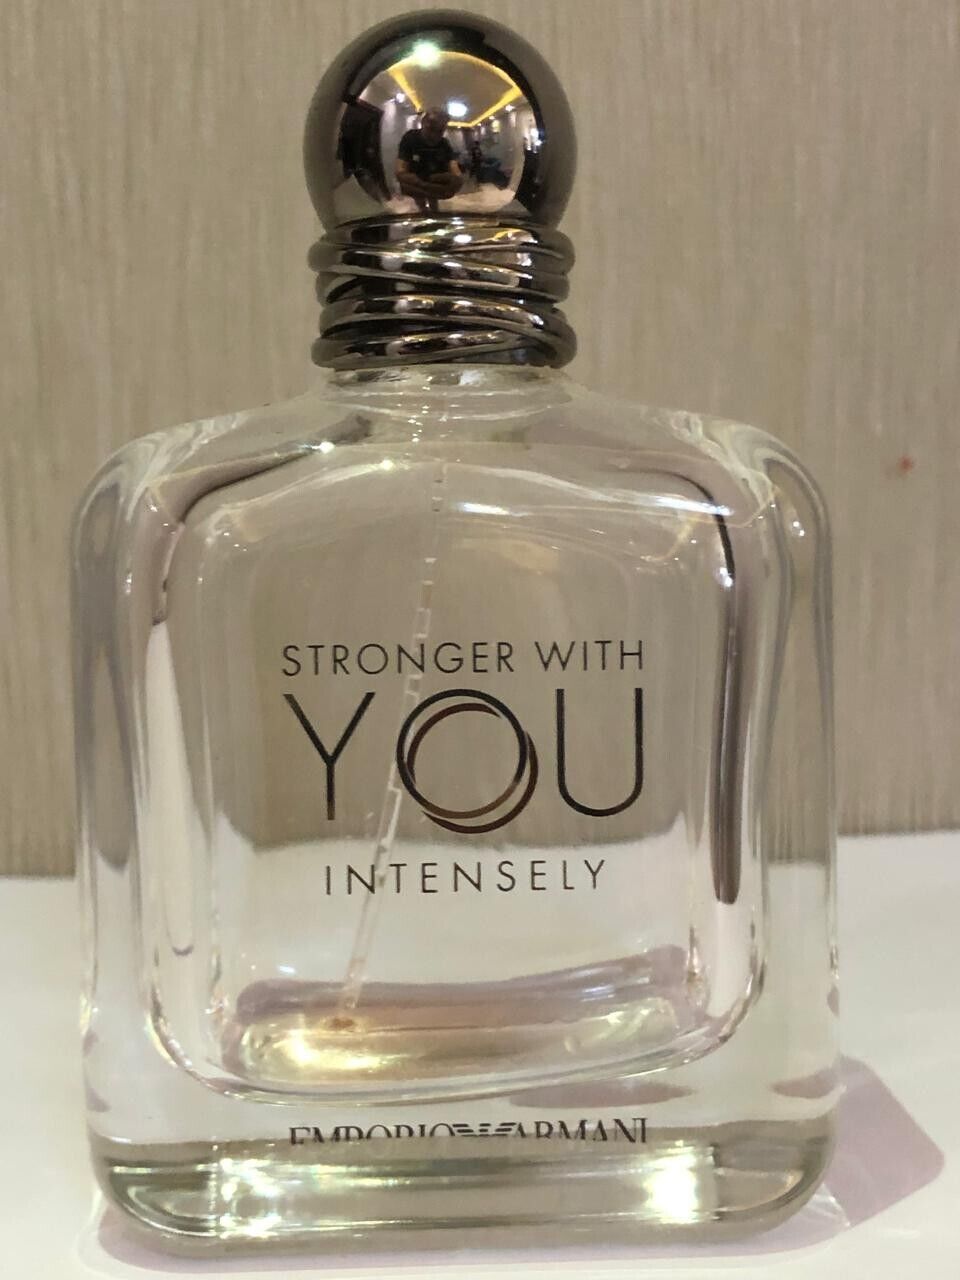 Empty-Stronger With You Intensely 100ml Emporio Armani Perfume bottle